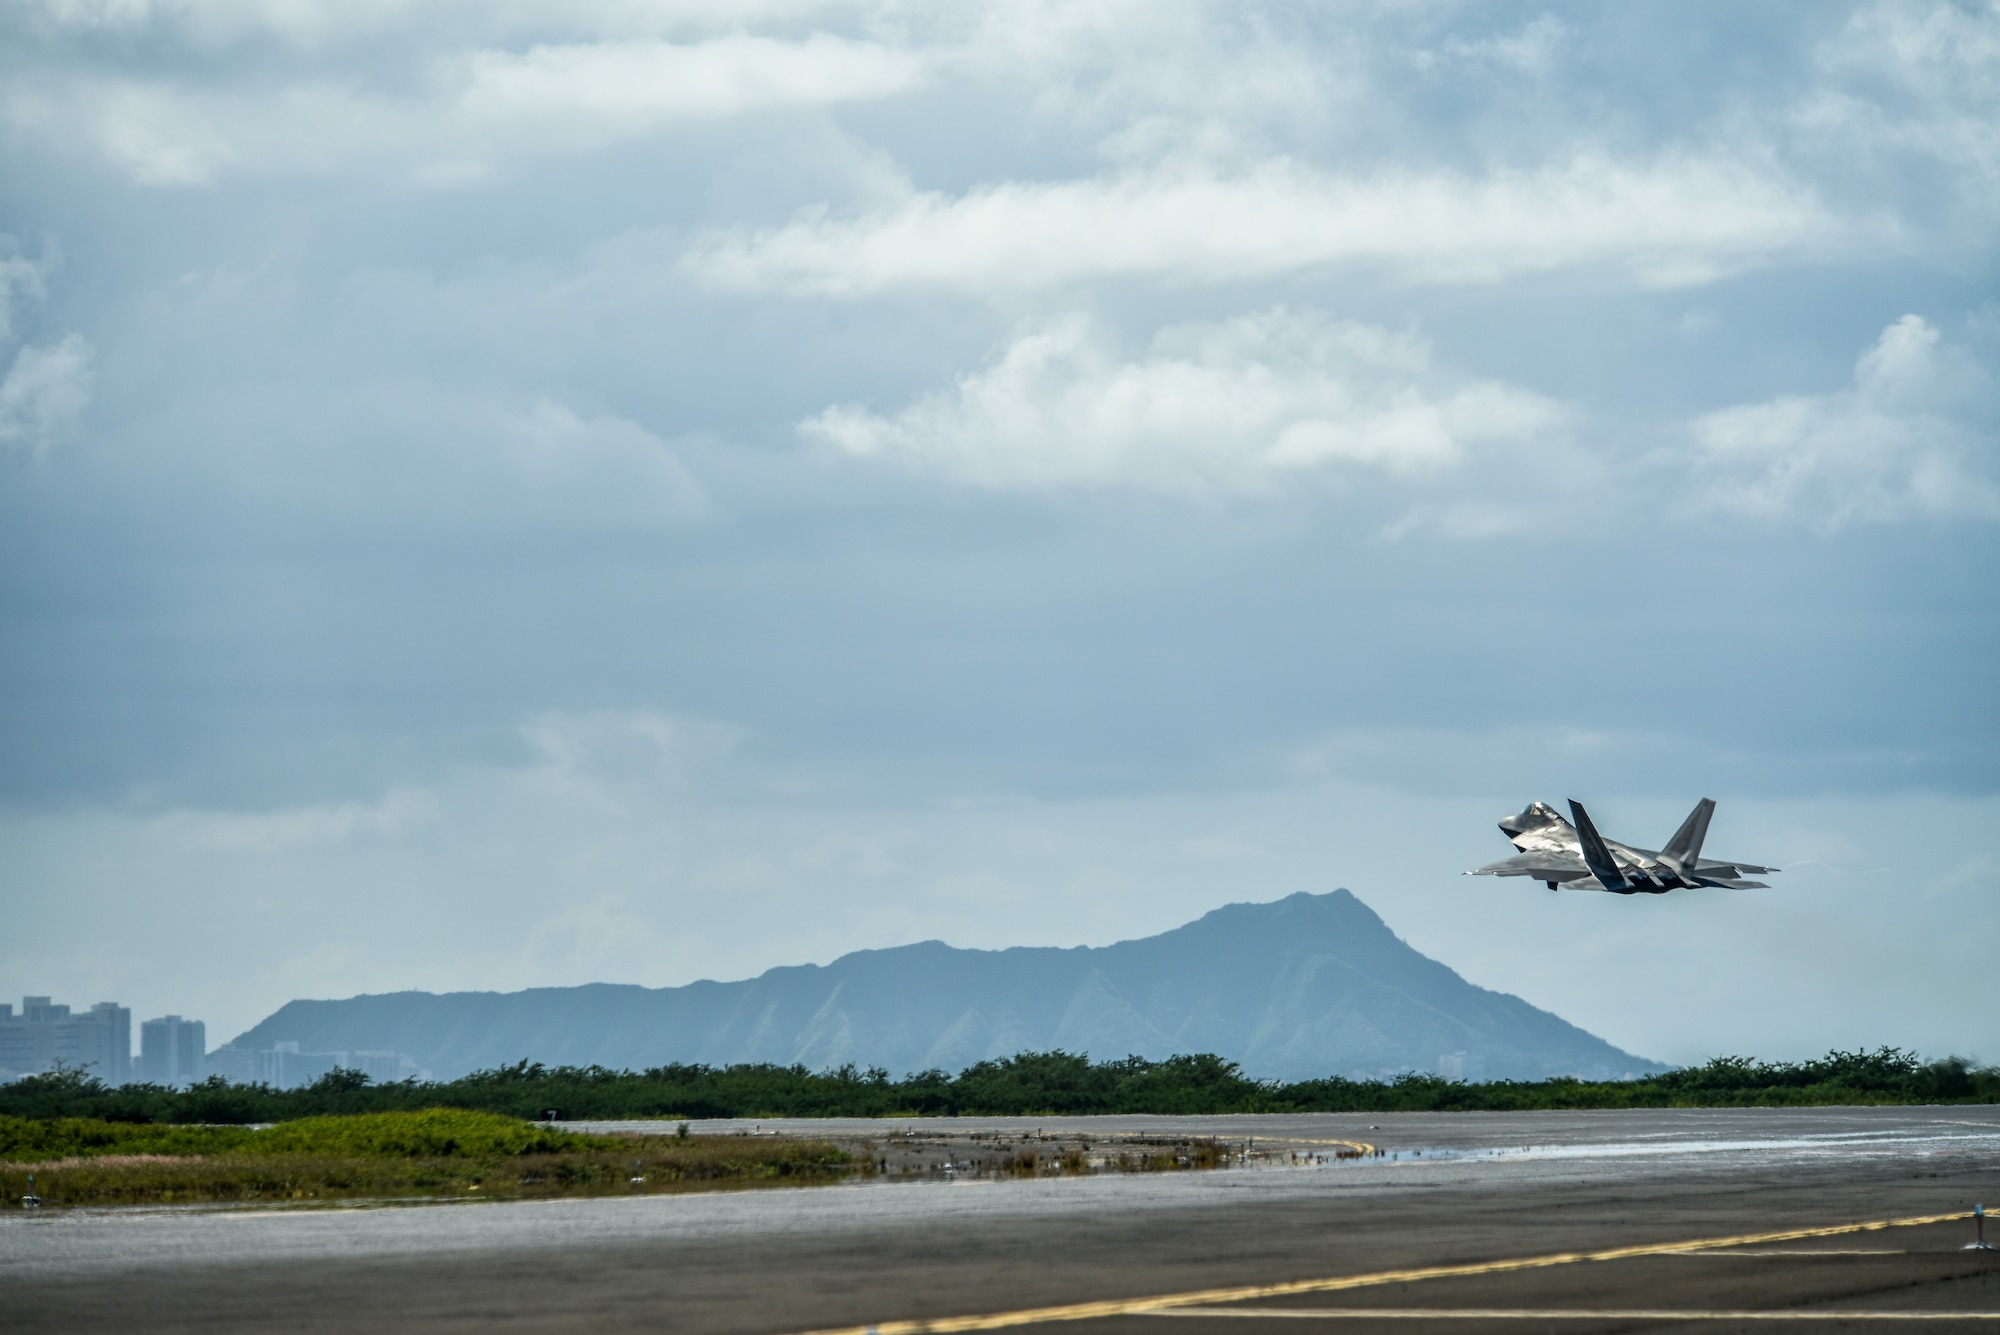 A U.S. Air Force F-22 Raptor takes off from the runway during a routine training schedule April 21, 2020, at Honolulu International Airport, Hawaii. Given the low traffic at the airport due to COVID-19 mitigation efforts, the active-duty 15th Wing and the Hawaii Air National Guard’s 154th Wing seized an opportunity to document the operation which showcases readiness and their unique Total Force Integration construct. The units of Team Hickam work together seamlessly to deliver combat airpower, tanker fuel, and humanitarian support and disaster relief across the Indo-Pacific. (U.S. Air Force photo by Tech. Sgt. Anthony Nelson Jr.)